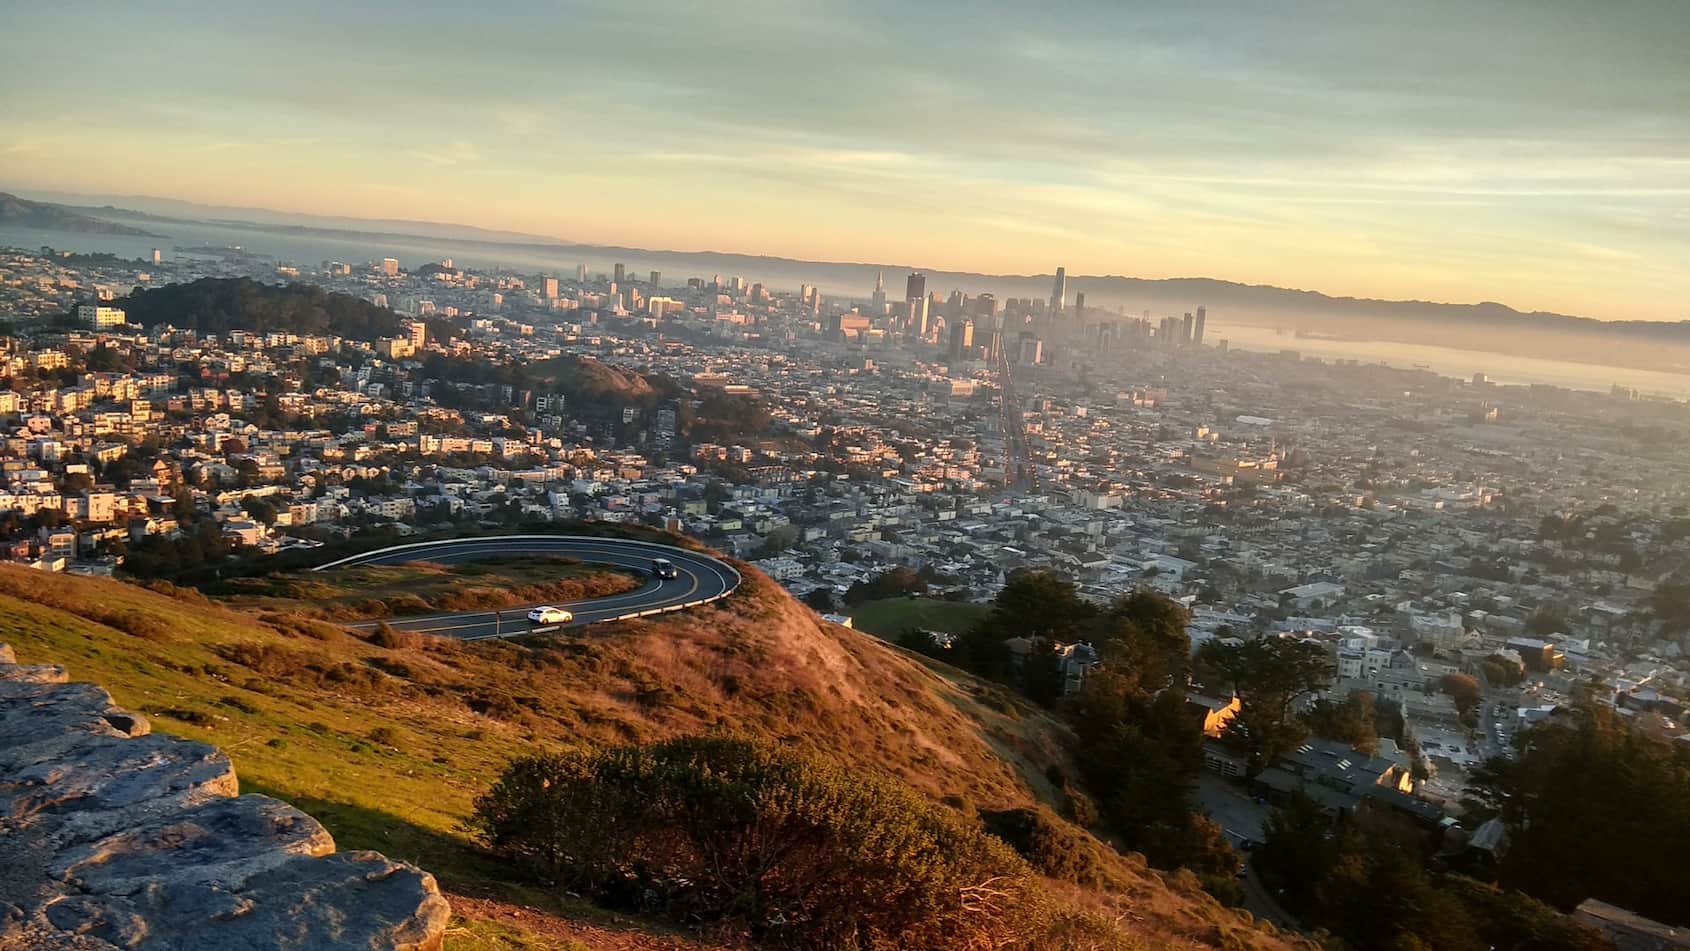 View of Silicon Valley from a GovTechie's perspective